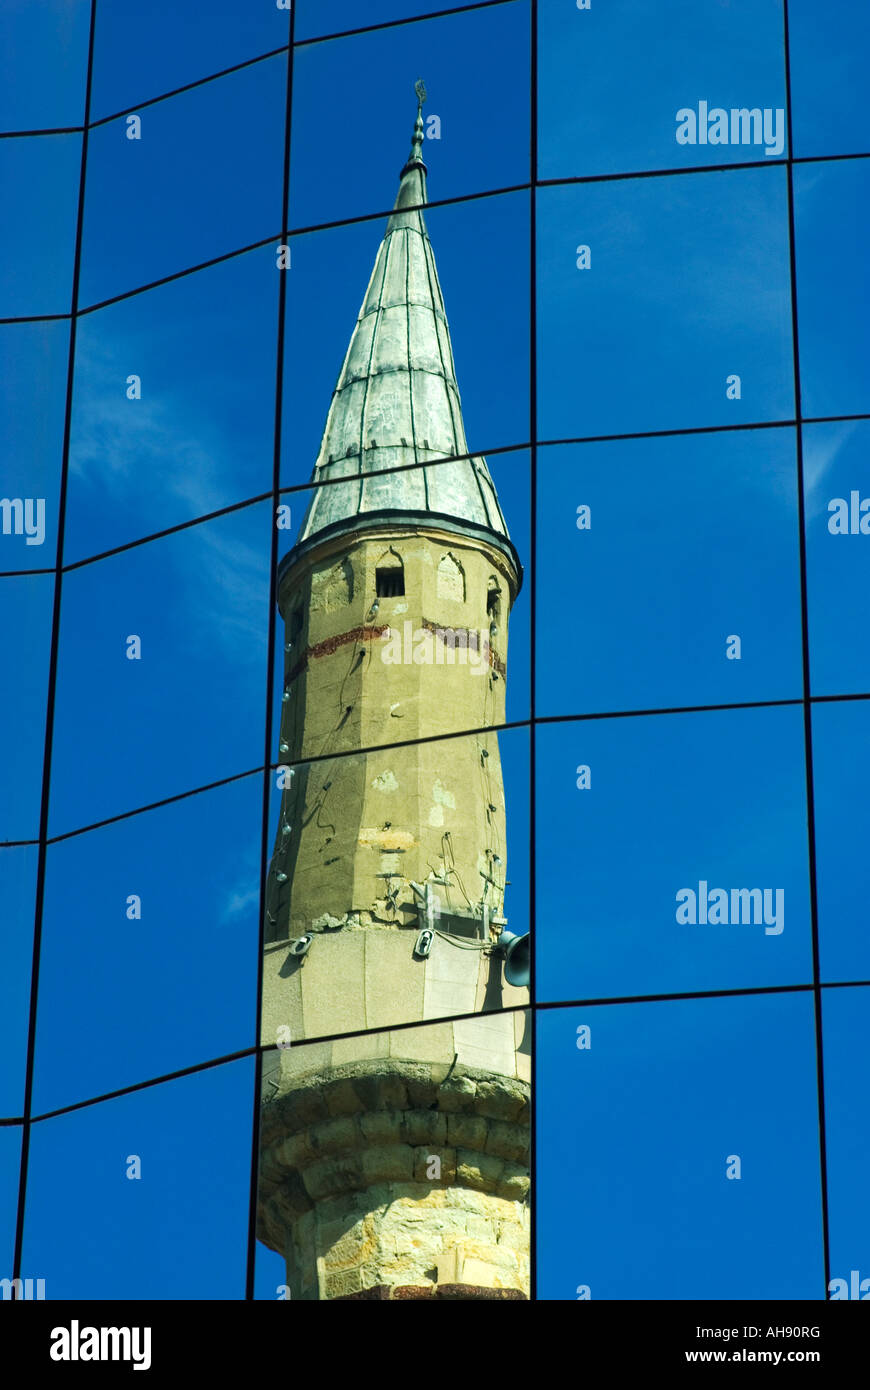 Reflection of old mosque in modern glass building, Prishtina, Kosovo, Eastern Europe Stock Photo